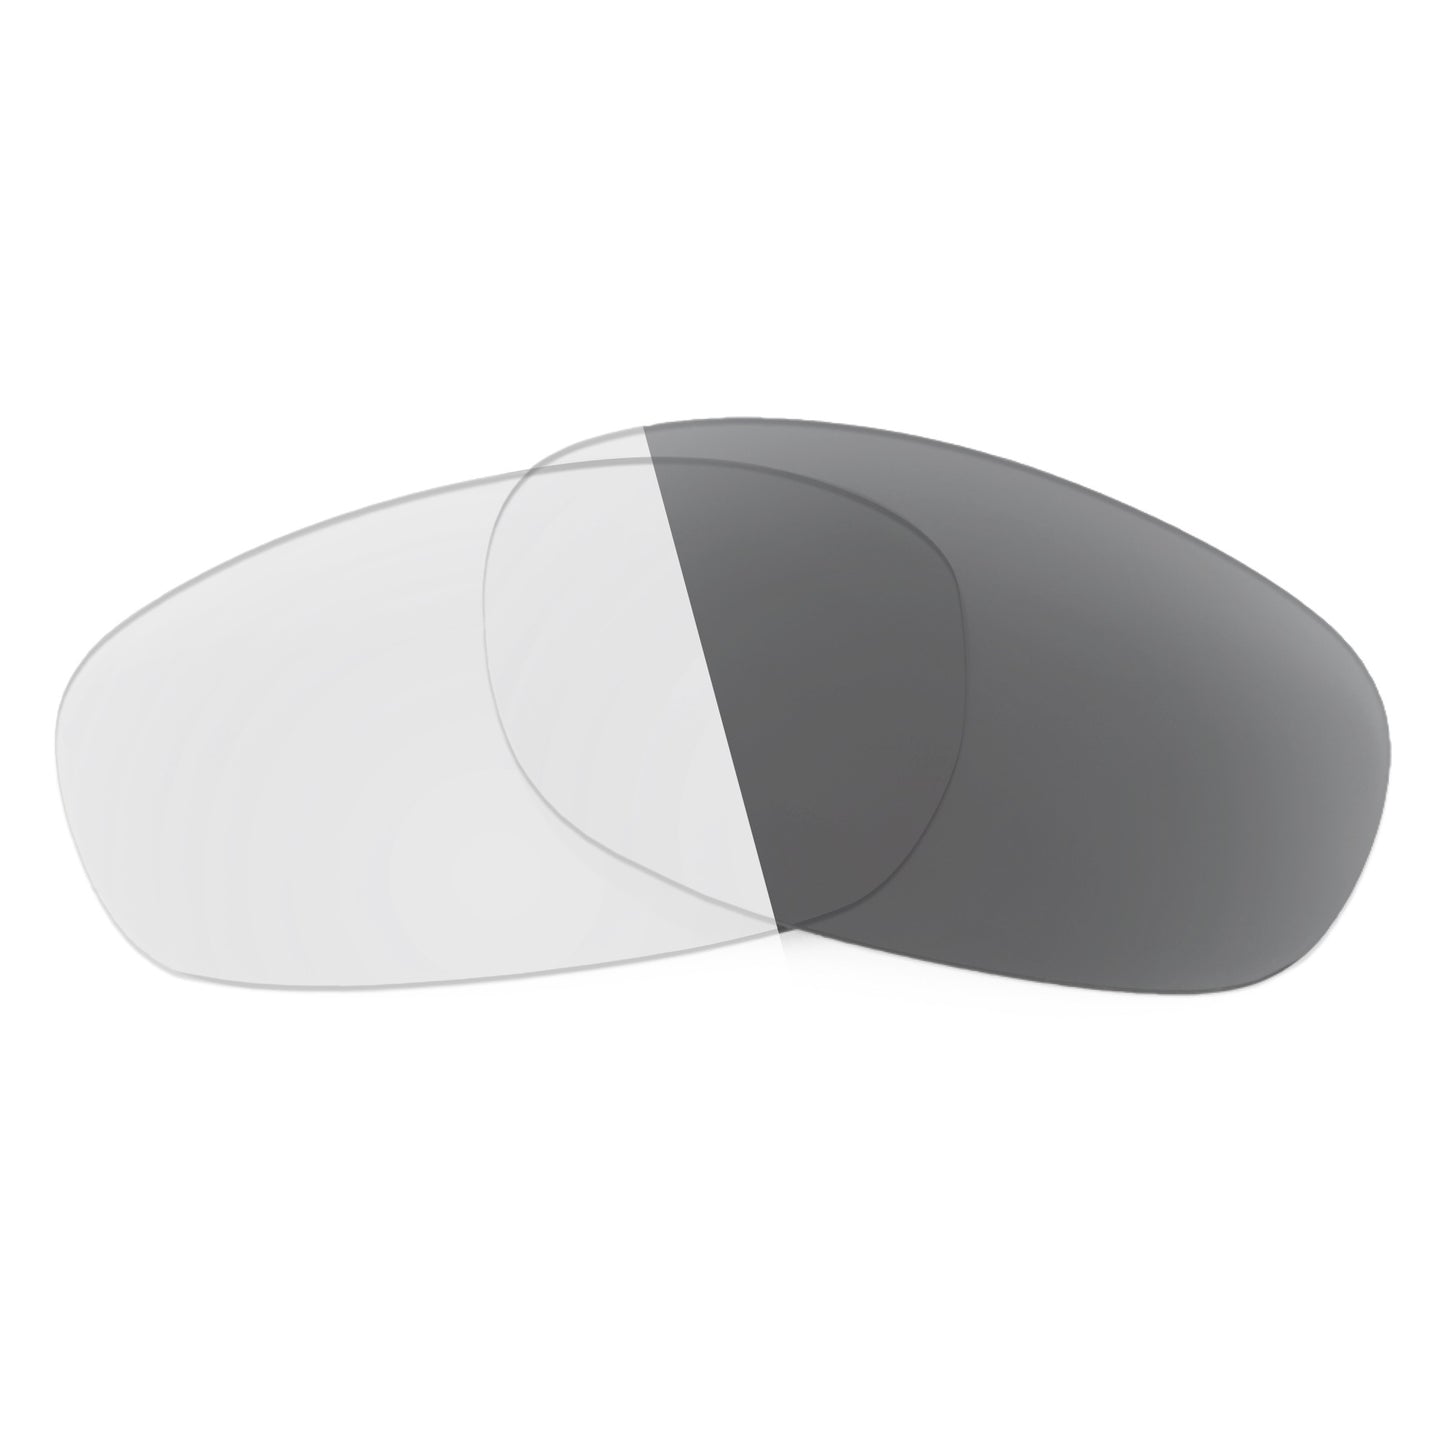 Revant replacement lenses for Ray-Ban RB8351 60mm Non-Polarized Adapt Gray Photochromic